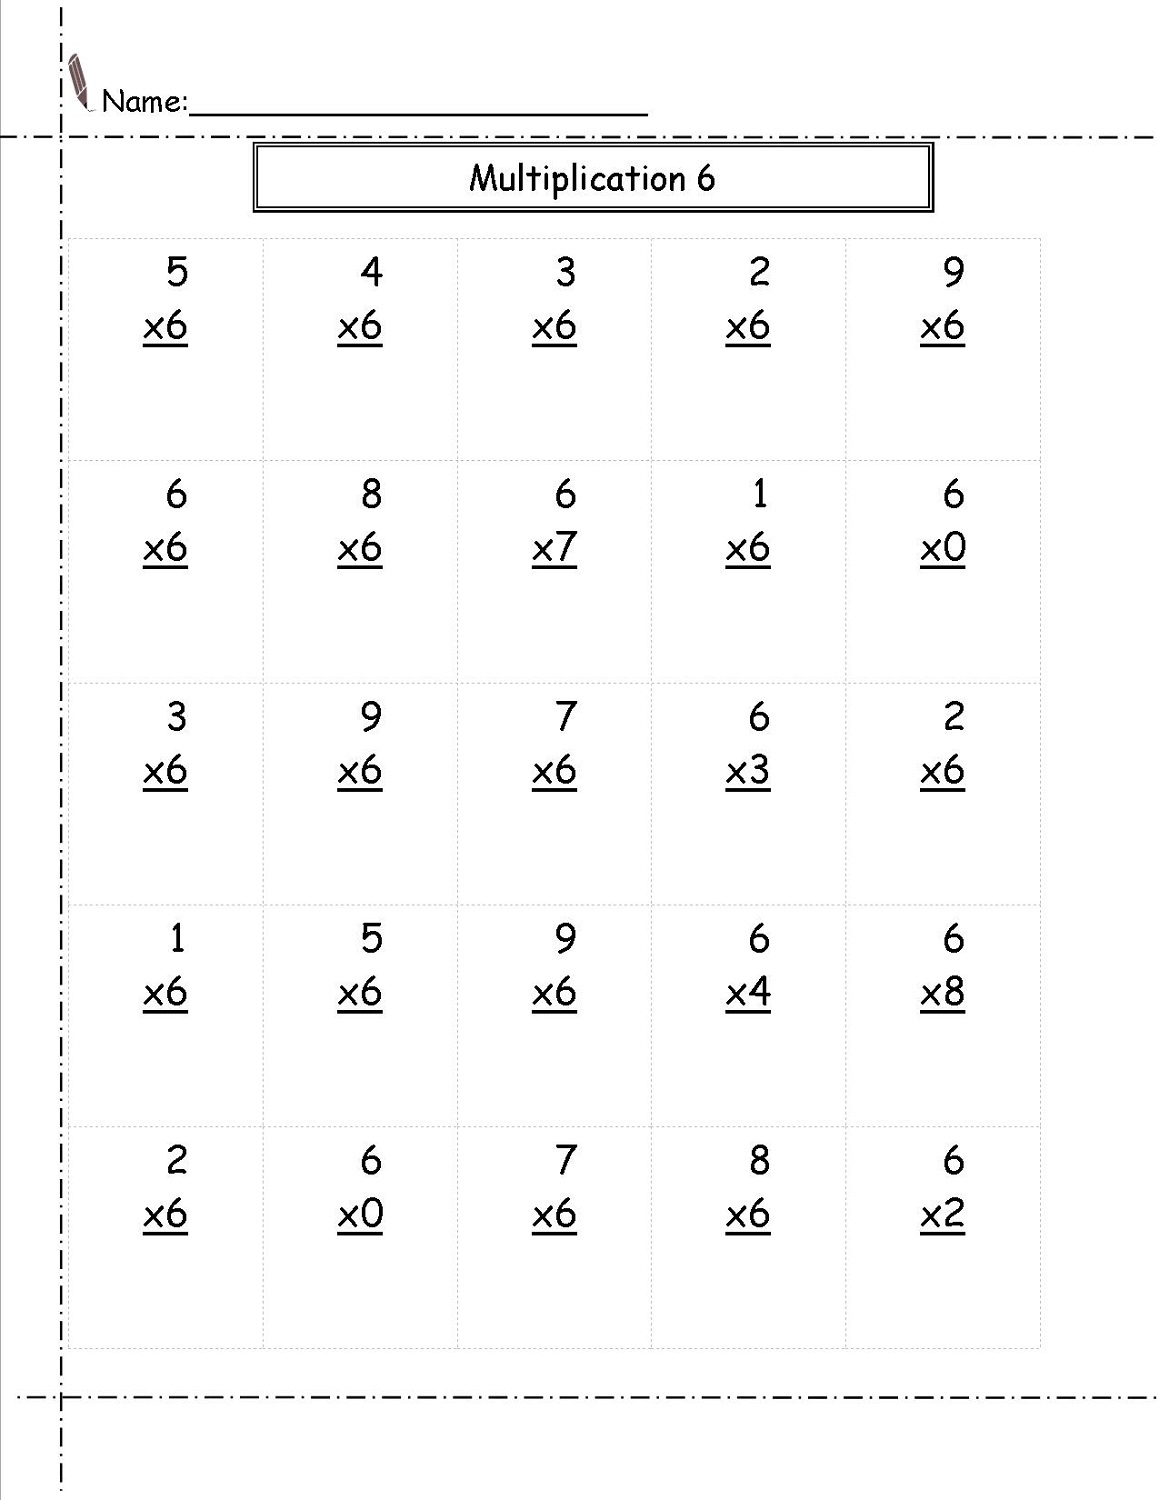 printable-multiplication-by-6-printable-multiplication-flash-cards